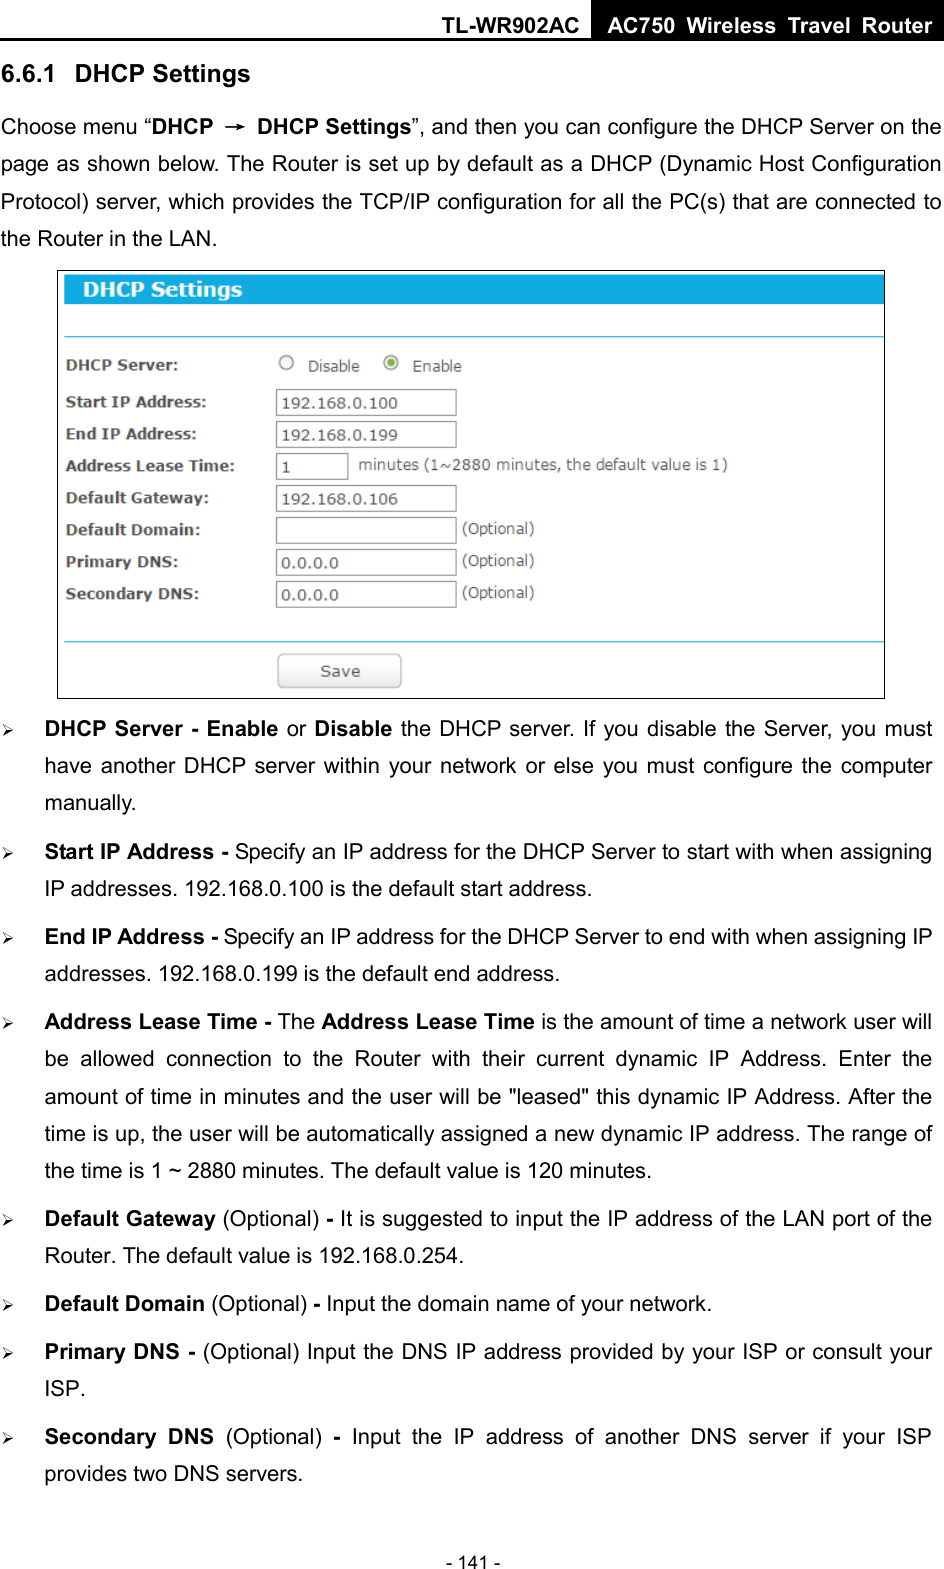 TL-WR902AC AC750  Wireless Travel Router  - 141 - 6.6.1 DHCP Settings Choose menu “DHCP → DHCP Settings”, and then you can configure the DHCP Server on the page as shown below. The Router is set up by default as a DHCP (Dynamic Host Configuration Protocol) server, which provides the TCP/IP configuration for all the PC(s) that are connected to the Router in the LAN.     DHCP Server - Enable or Disable the DHCP server. If you disable the Server, you must have another DHCP server within your network or else you must configure the computer manually.  Start IP Address - Specify an IP address for the DHCP Server to start with when assigning IP addresses. 192.168.0.100 is the default start address.  End IP Address - Specify an IP address for the DHCP Server to end with when assigning IP addresses. 192.168.0.199 is the default end address.  Address Lease Time - The Address Lease Time is the amount of time a network user will be allowed connection to the Router with their current dynamic IP Address. Enter the amount of time in minutes and the user will be &quot;leased&quot; this dynamic IP Address. After the time is up, the user will be automatically assigned a new dynamic IP address. The range of the time is 1 ~ 2880 minutes. The default value is 120 minutes.  Default Gateway (Optional) - It is suggested to input the IP address of the LAN port of the Router. The default value is 192.168.0.254.  Default Domain (Optional) - Input the domain name of your network.  Primary DNS - (Optional) Input the DNS IP address provided by your ISP or consult your ISP.  Secondary DNS (Optional)  -  Input the IP address of another DNS server if your ISP provides two DNS servers. 